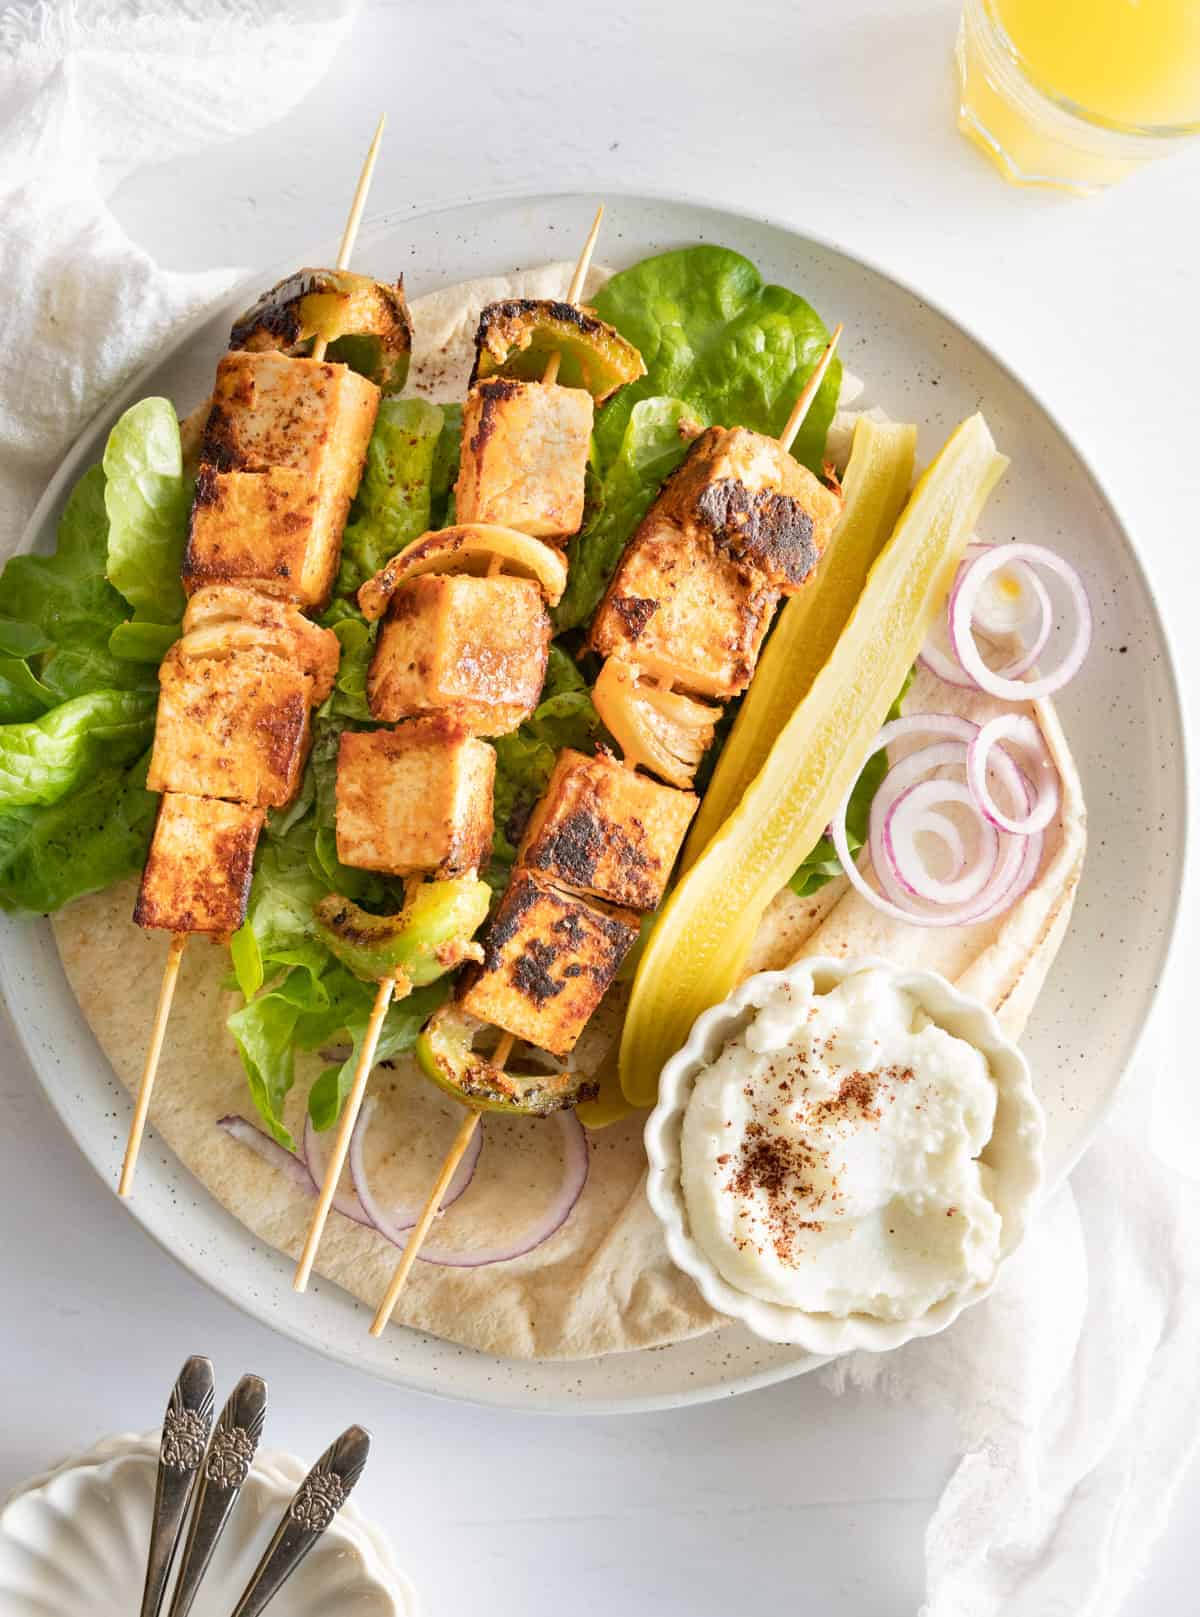 Grilled tofu and vegetables on a plate with lettuce, cheese, onions, and a dipping sauce.